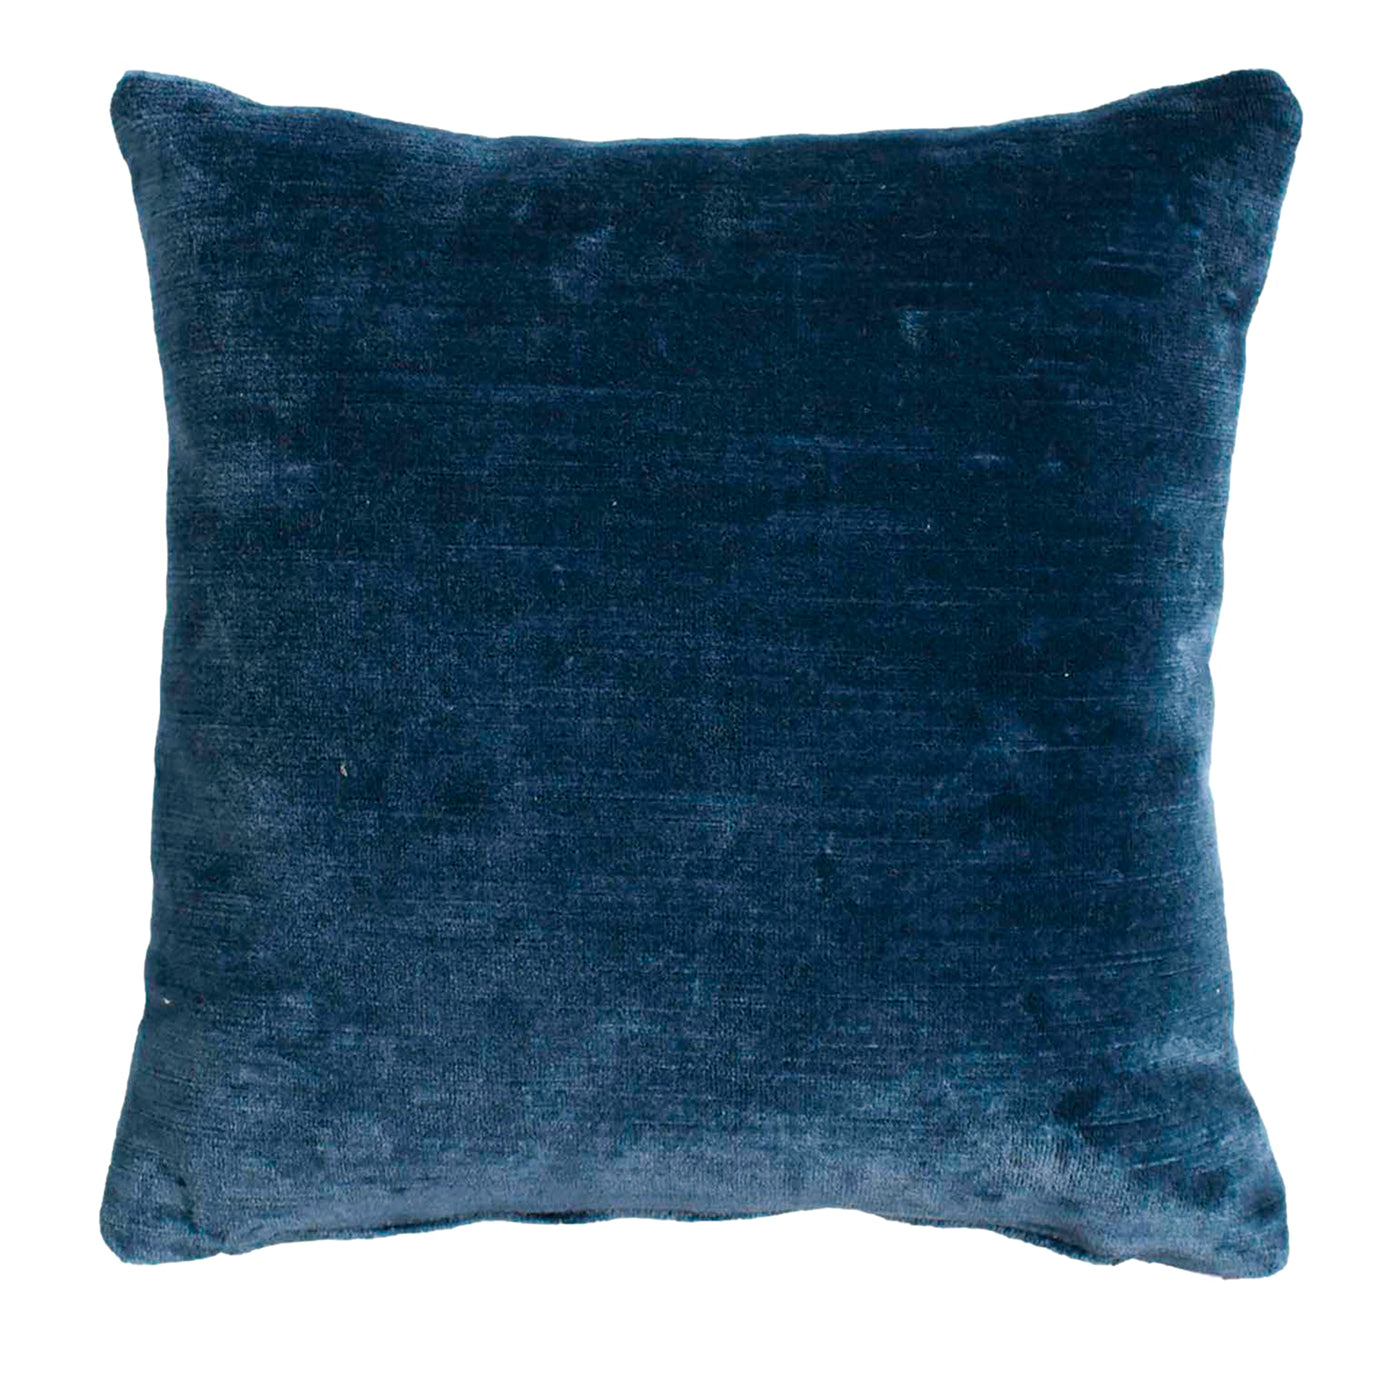 Decorative Blue and Gold Square Cushion - Alternative view 1